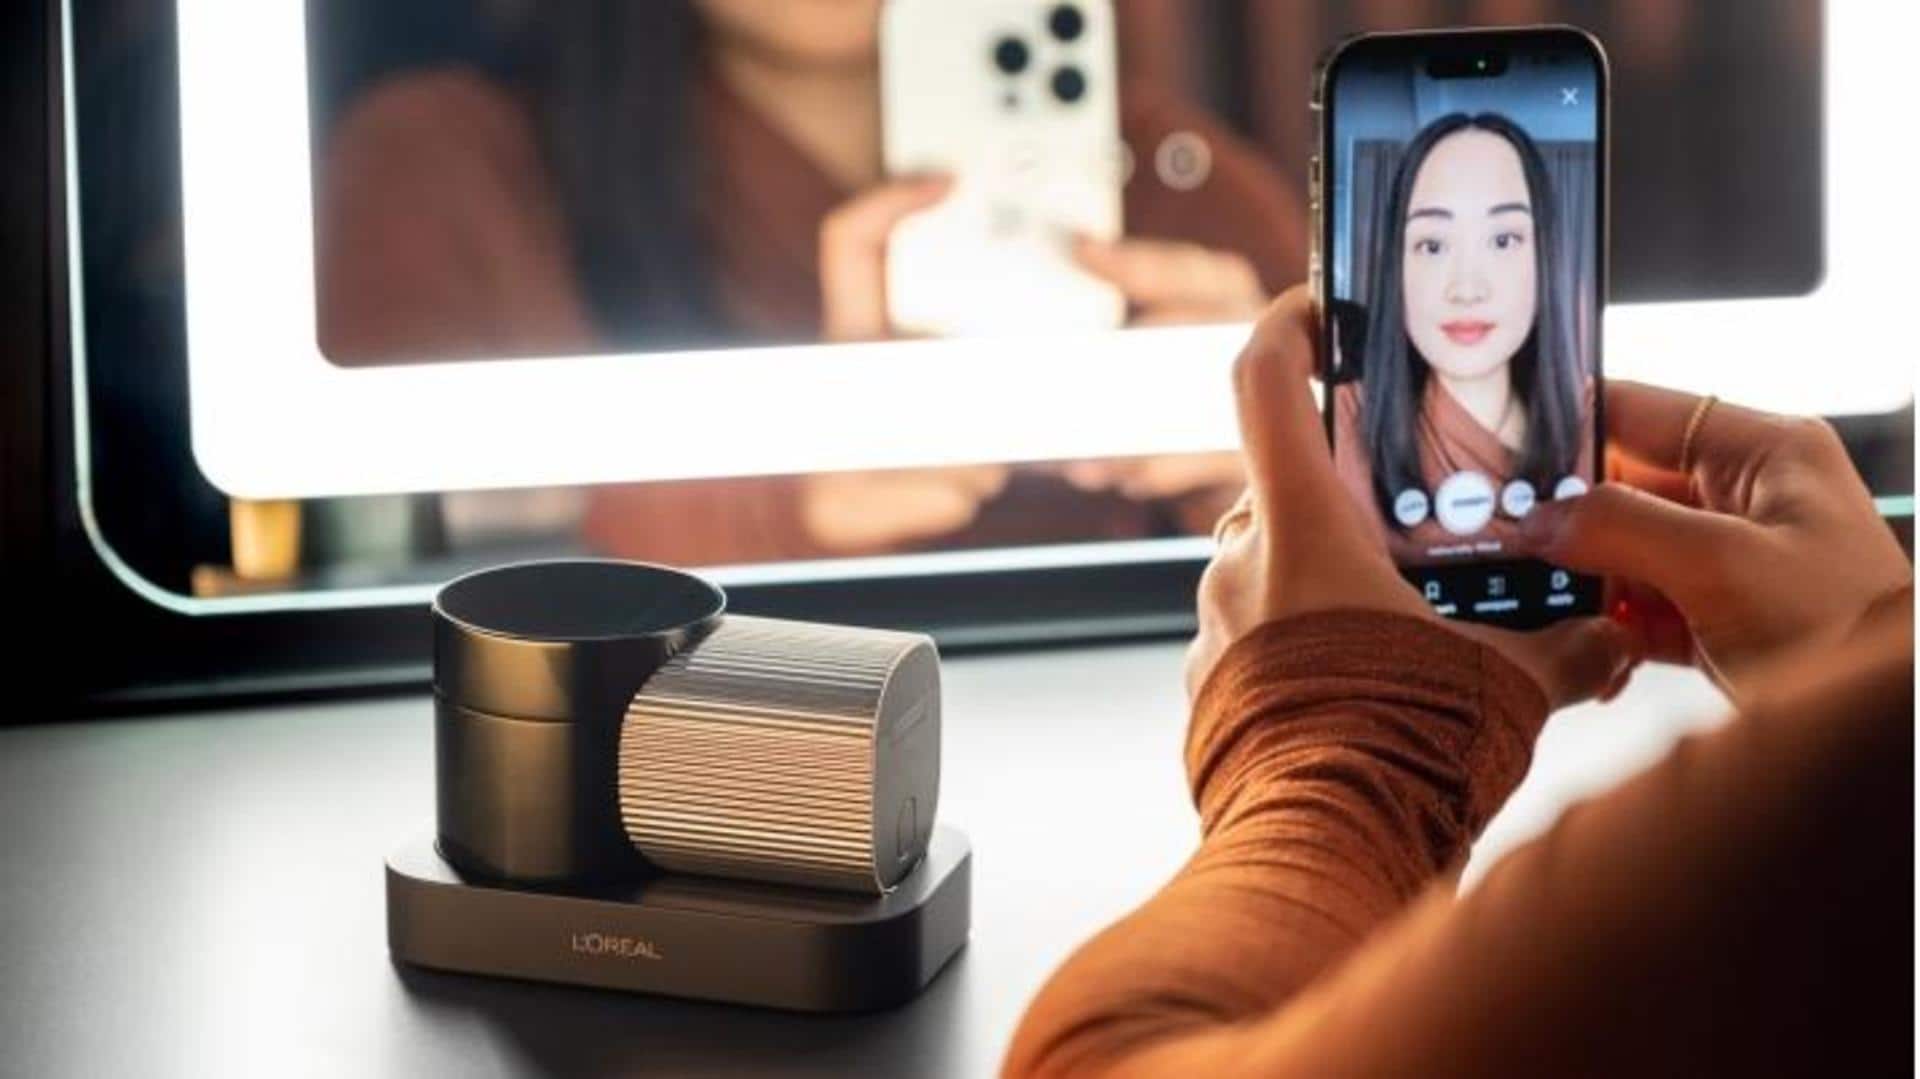 CES 2023: L'Oreal's gadget uses AR to print bespoke eyebrows